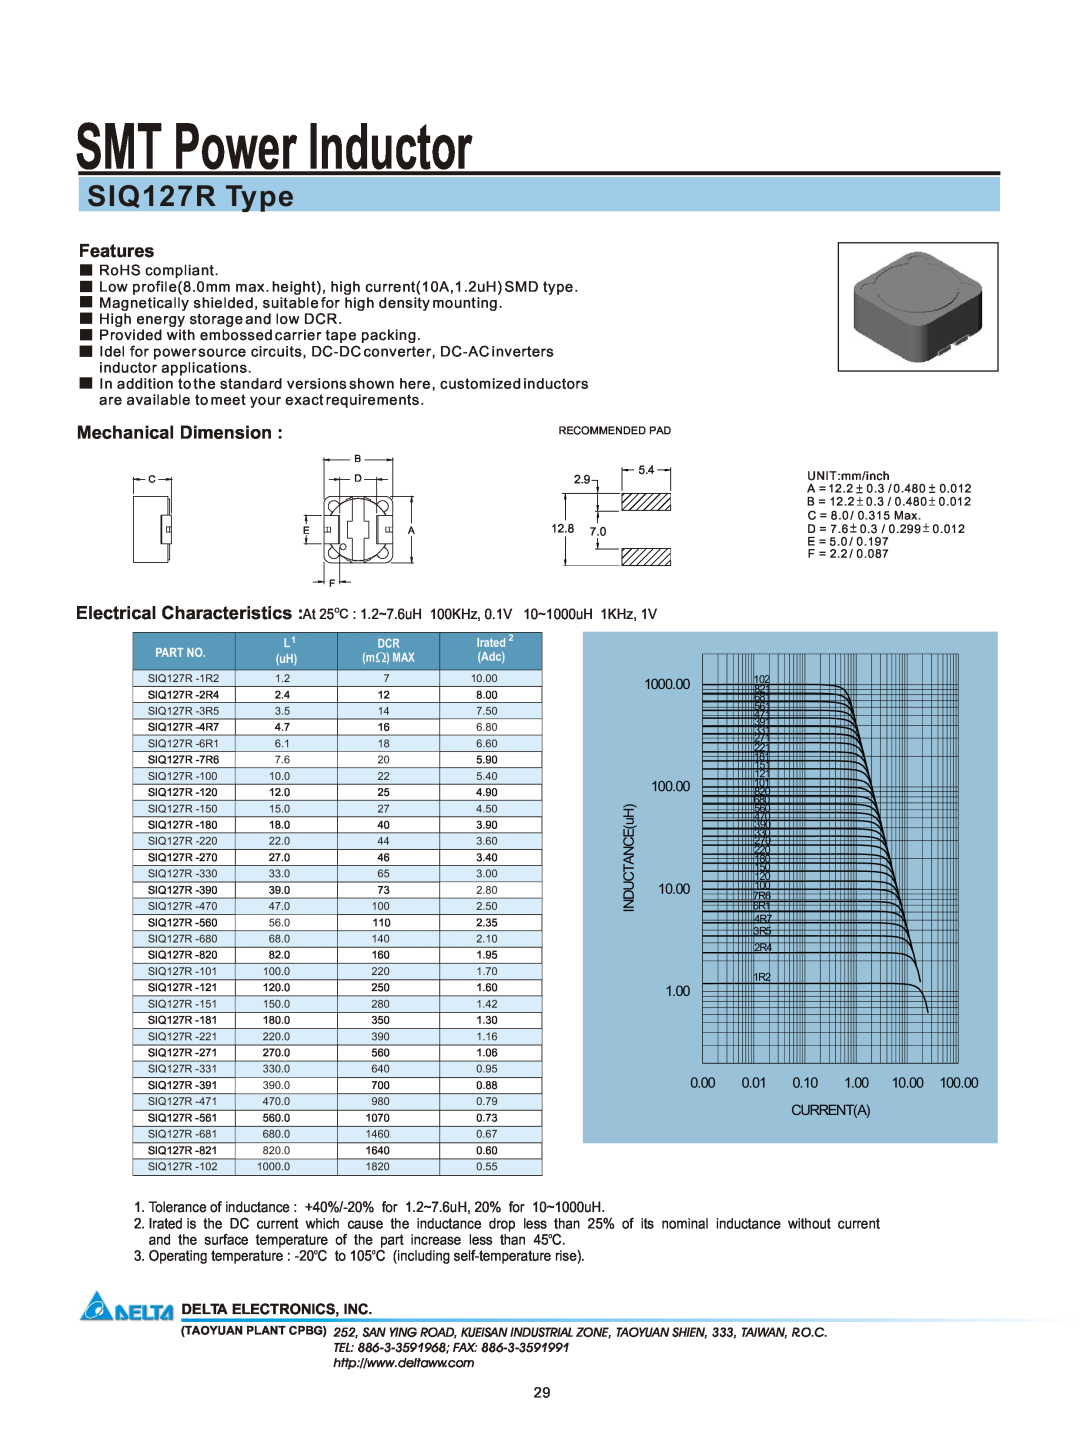 Delta Electronics manual SMT Power Inductor, SIQ127R Type, Features, Mechanical Dimension, Delta Electronics, Inc 